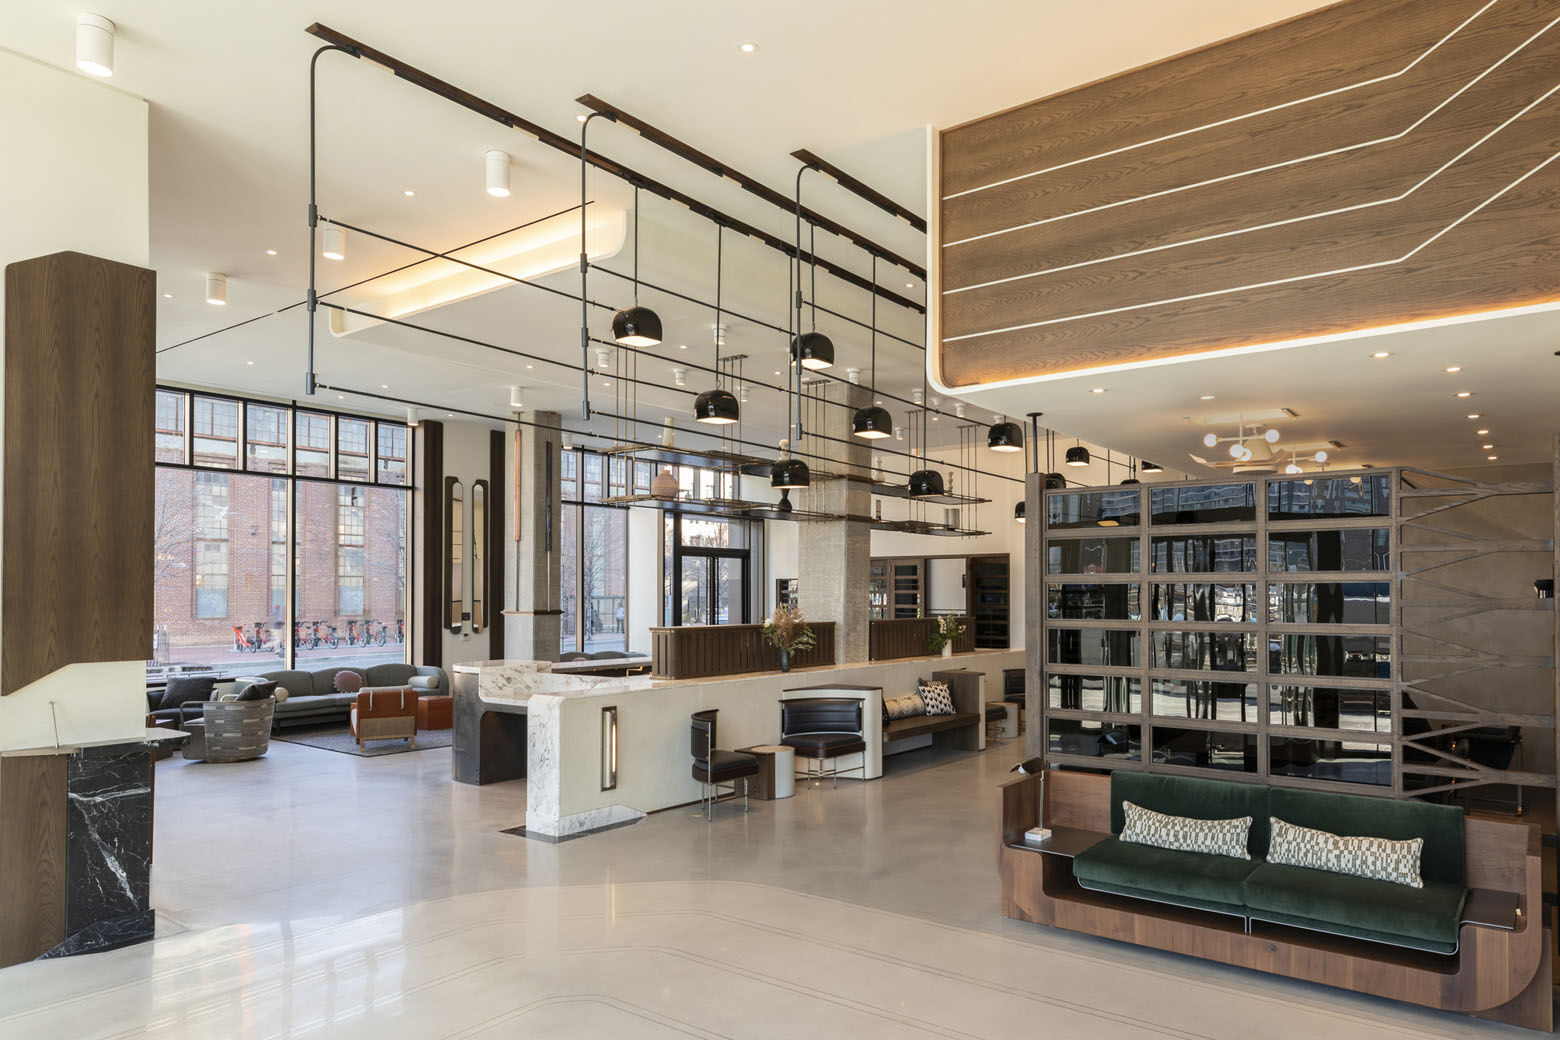 Thompson Washington D.C. occupies a newly built 11-story building, and its rooms features floor-to-ceiling windows and views of the Anacostia River and Nationals Park.